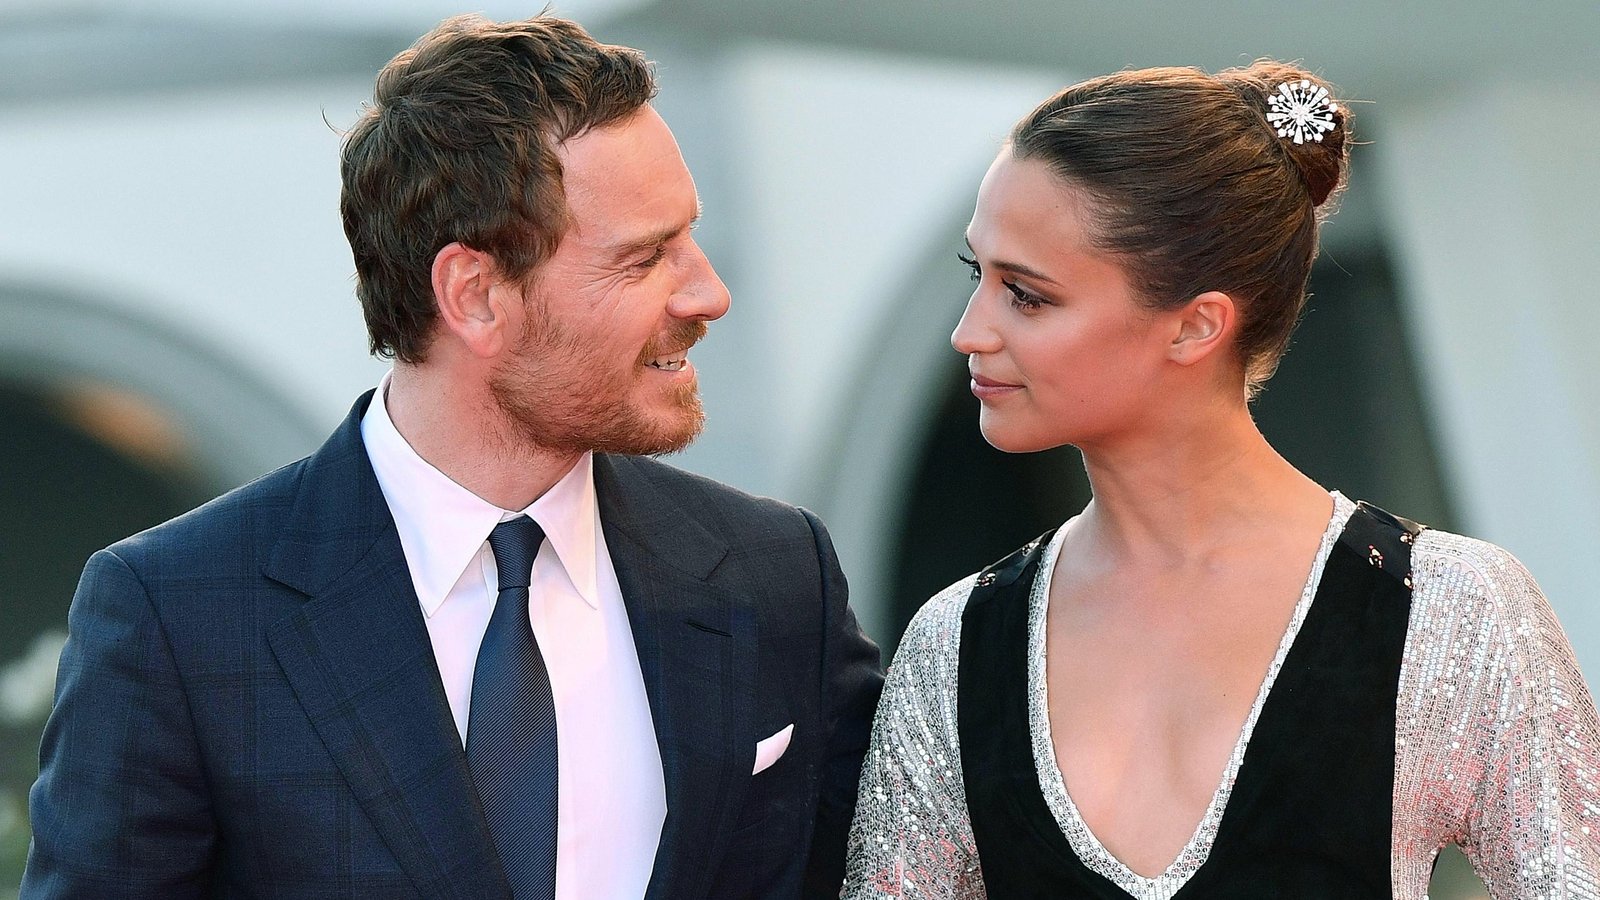 Michael Fassbender and Alicia Vikander's strongest couple moments